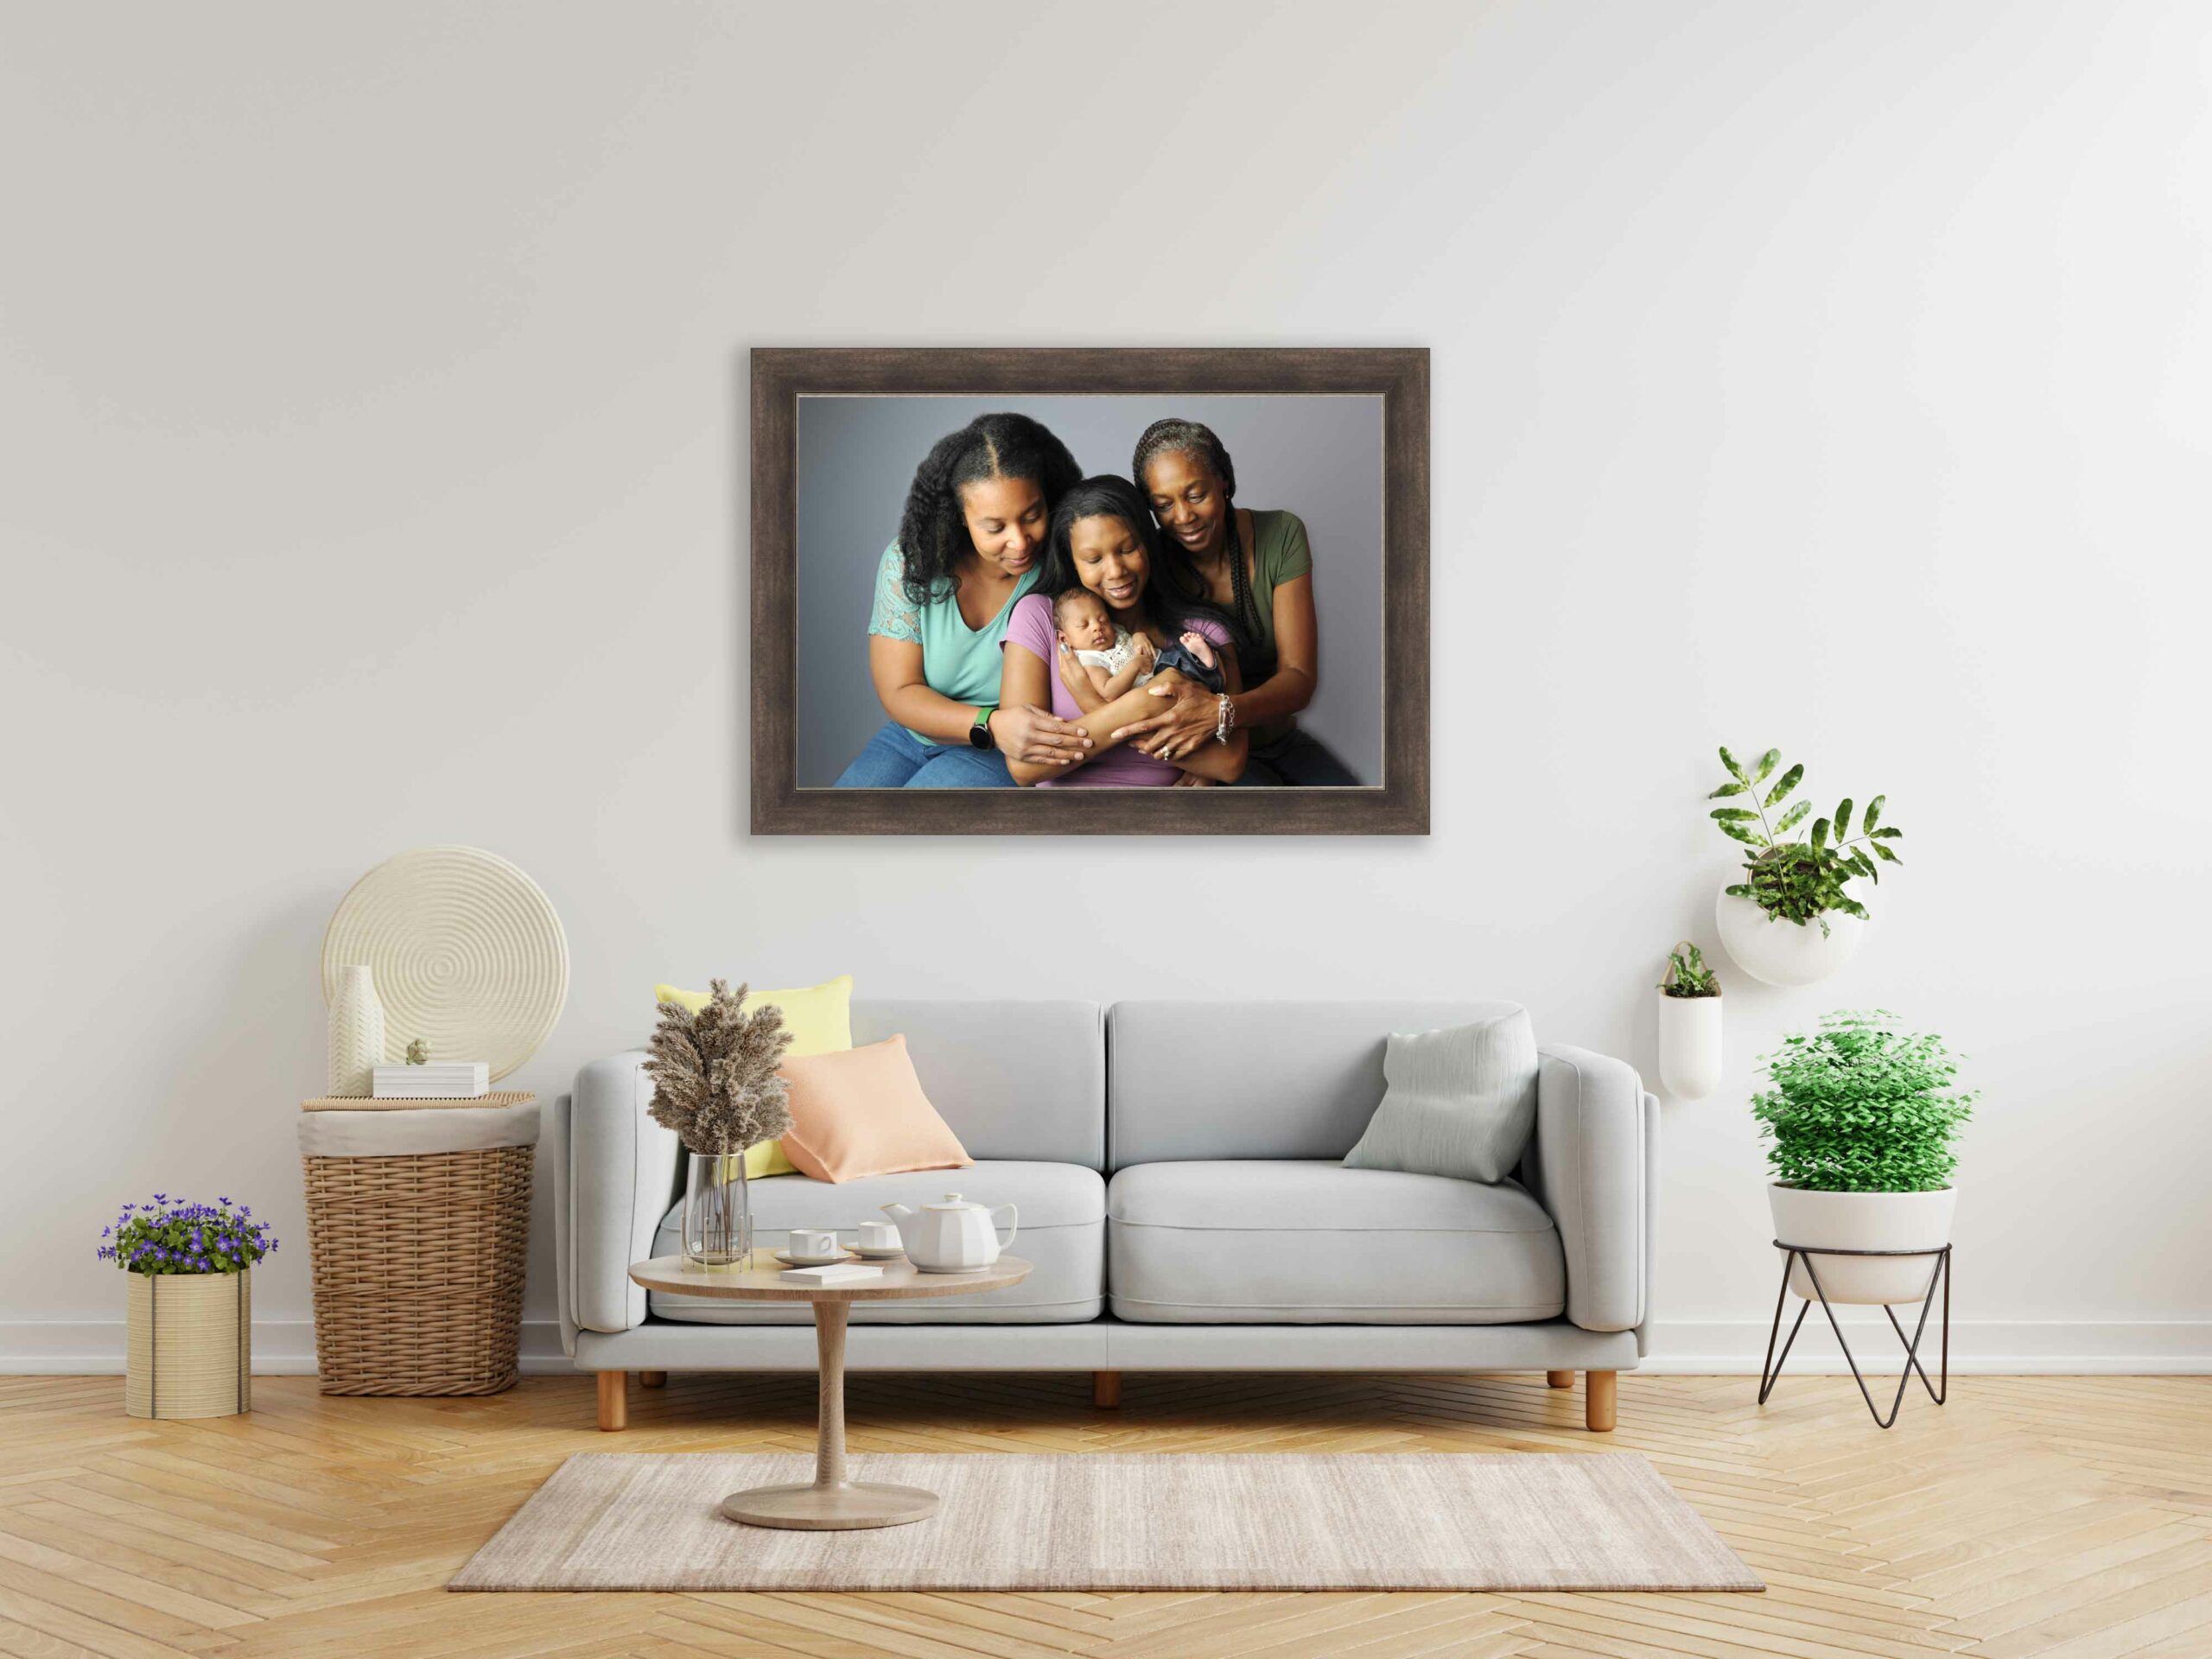 maryland newborn family session of a baby being held in a generational image framed above the couch